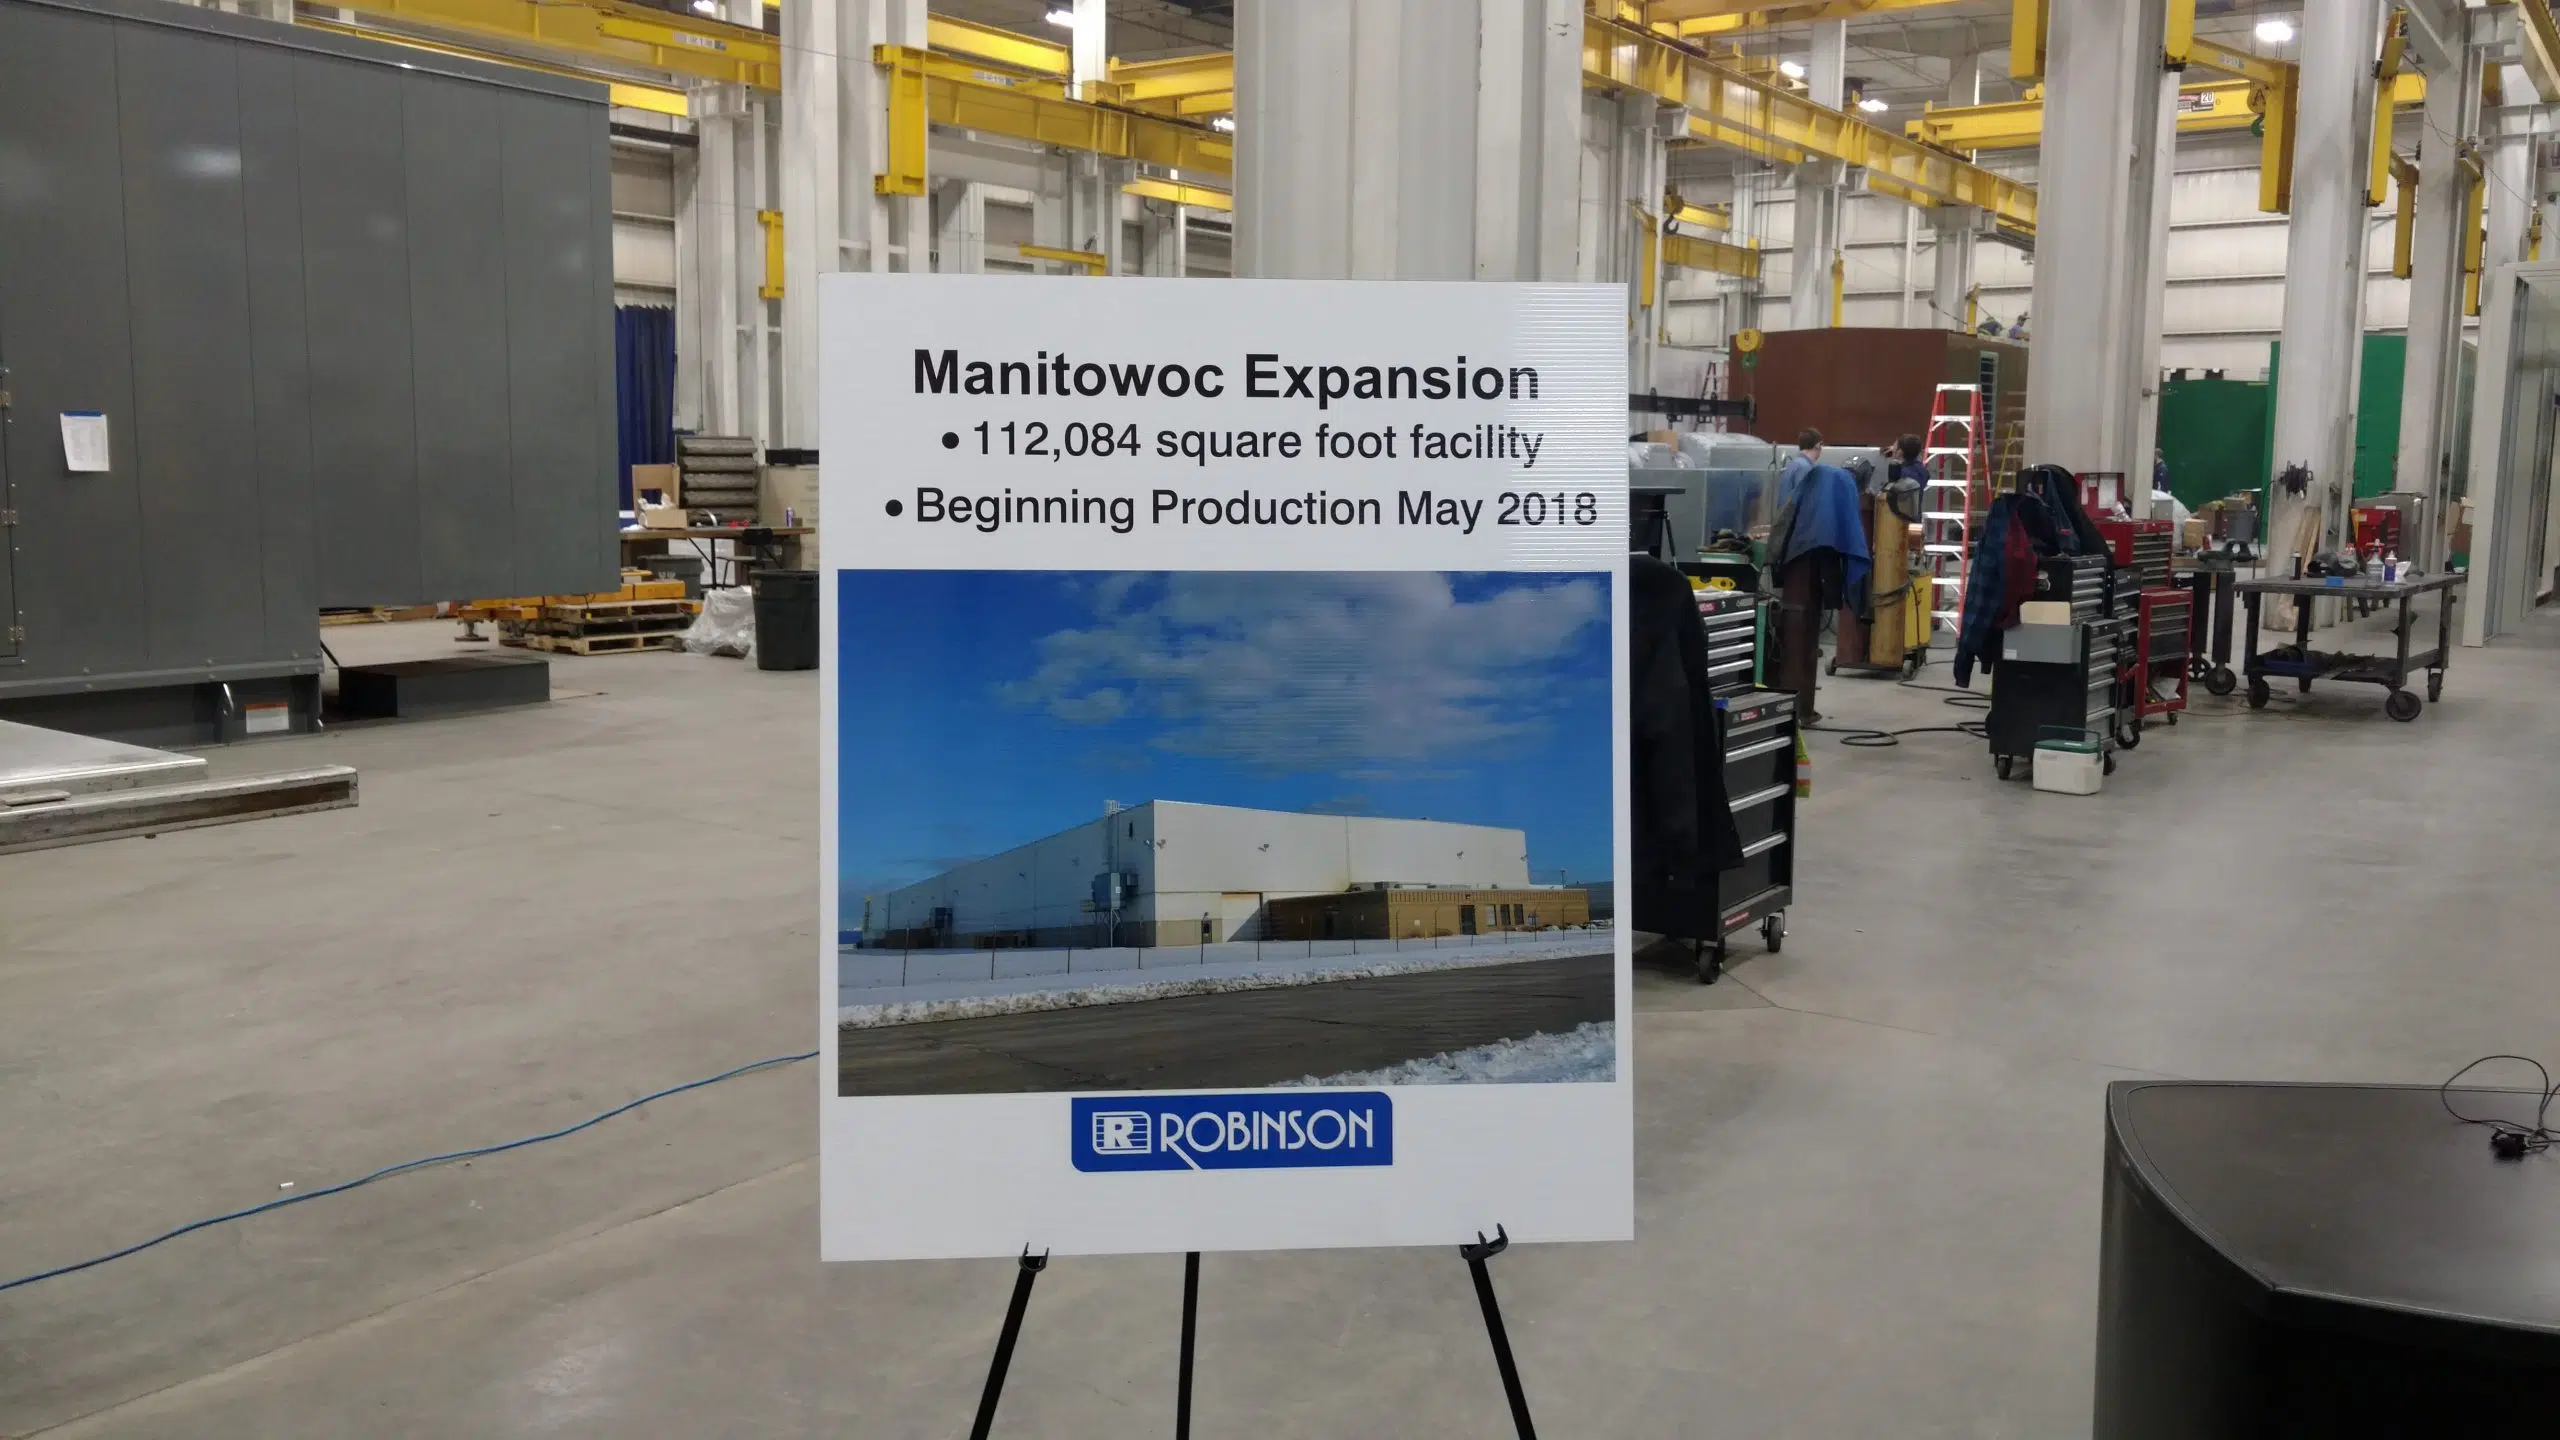 Robinson Metal Expansion Officially Announced Today